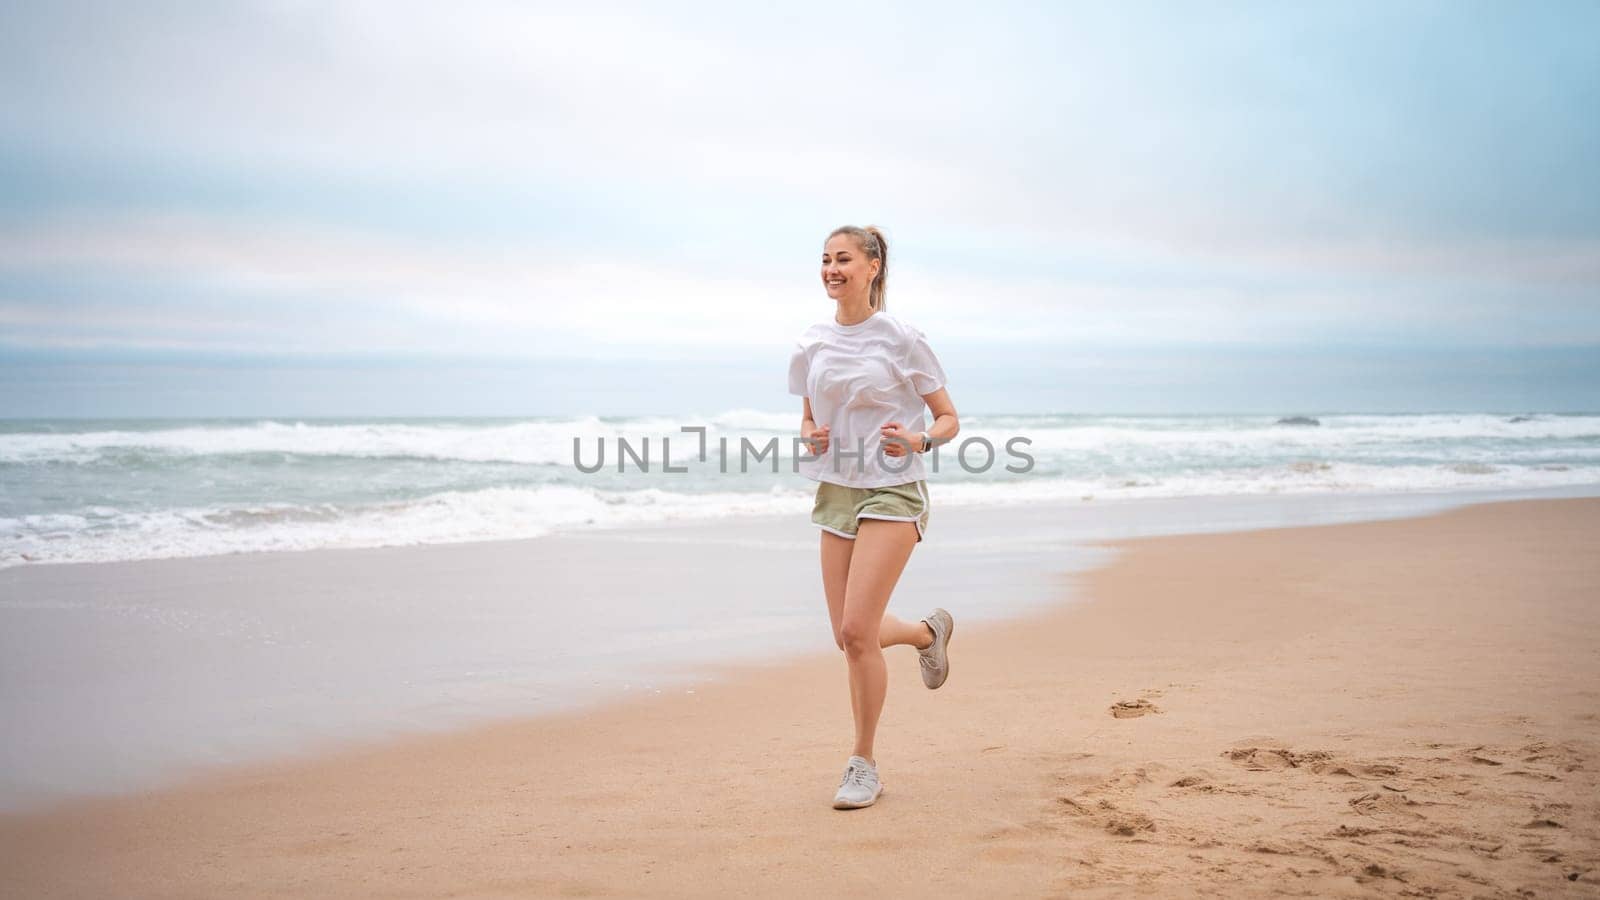 Woman jogging on beach. Sporty female jogging on sand beach, waves on background. Full body view woman in mini shorts and t-shirt who runs alongside ocean. Outdoor workout of trained fit girl.